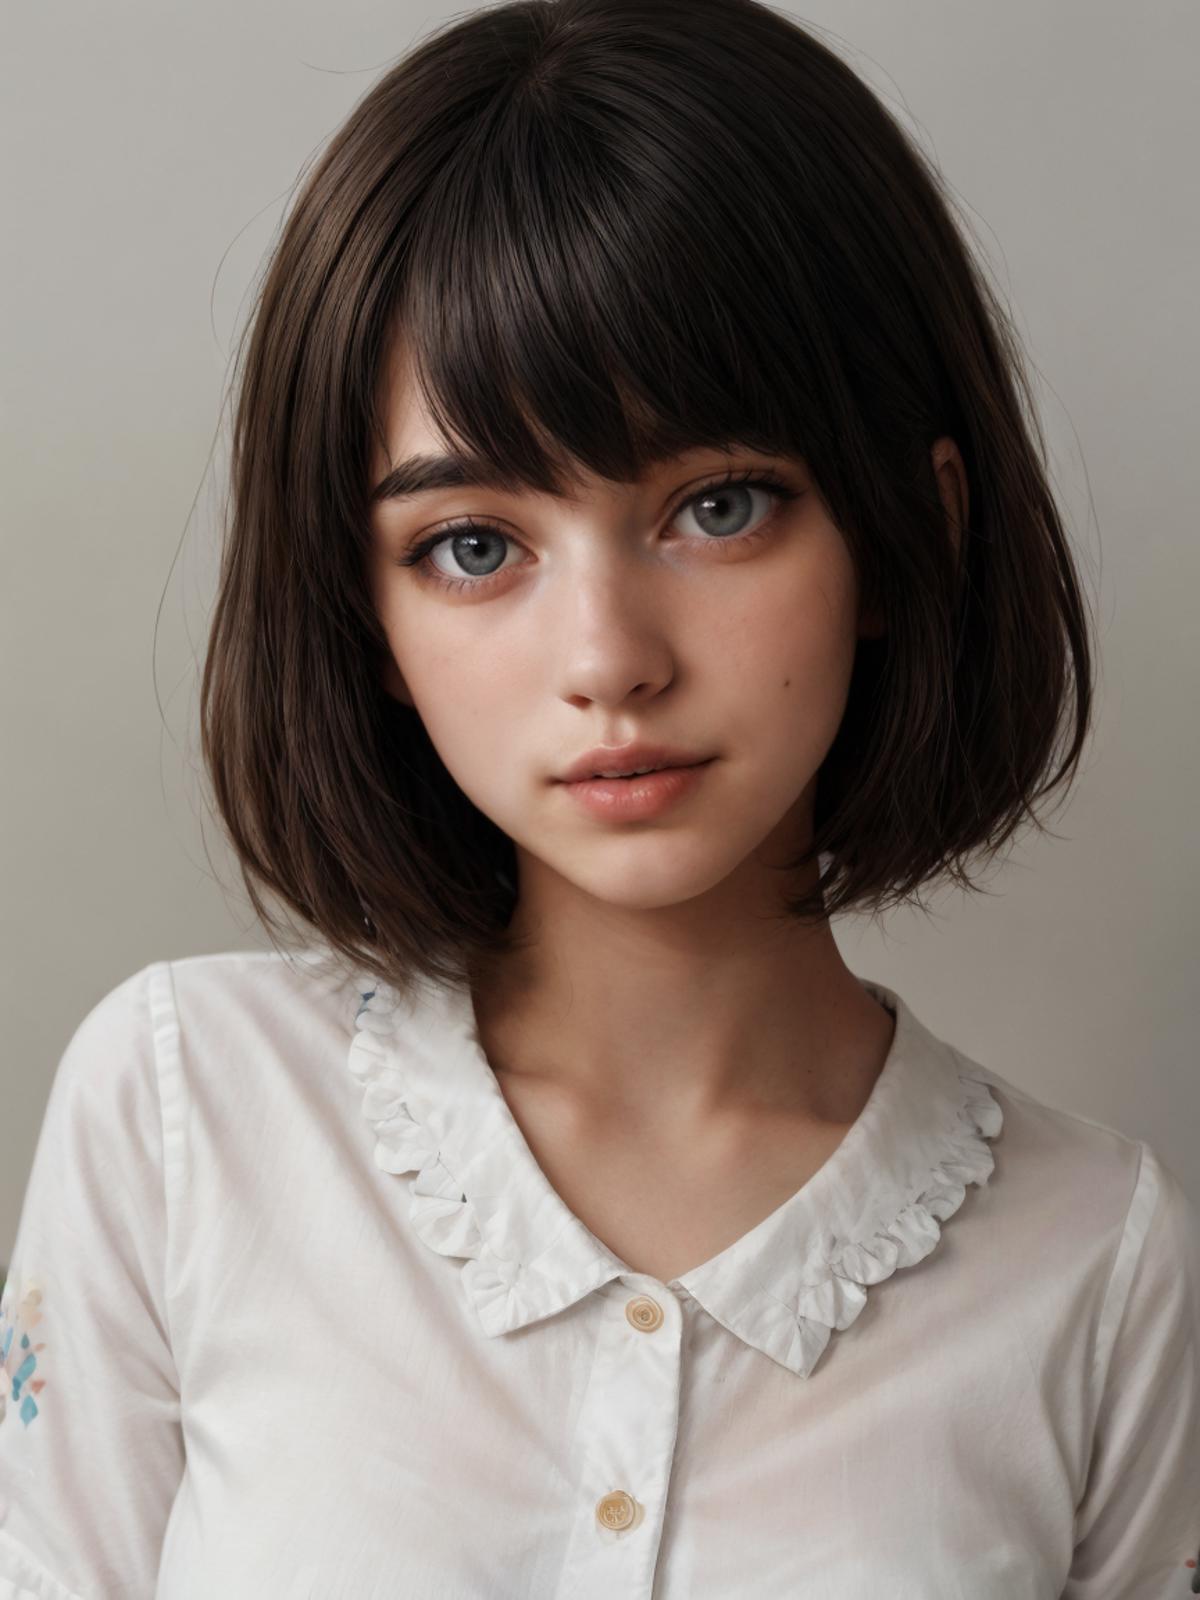 A pretty girl with brown hair and blue eyes wearing a white collared shirt.